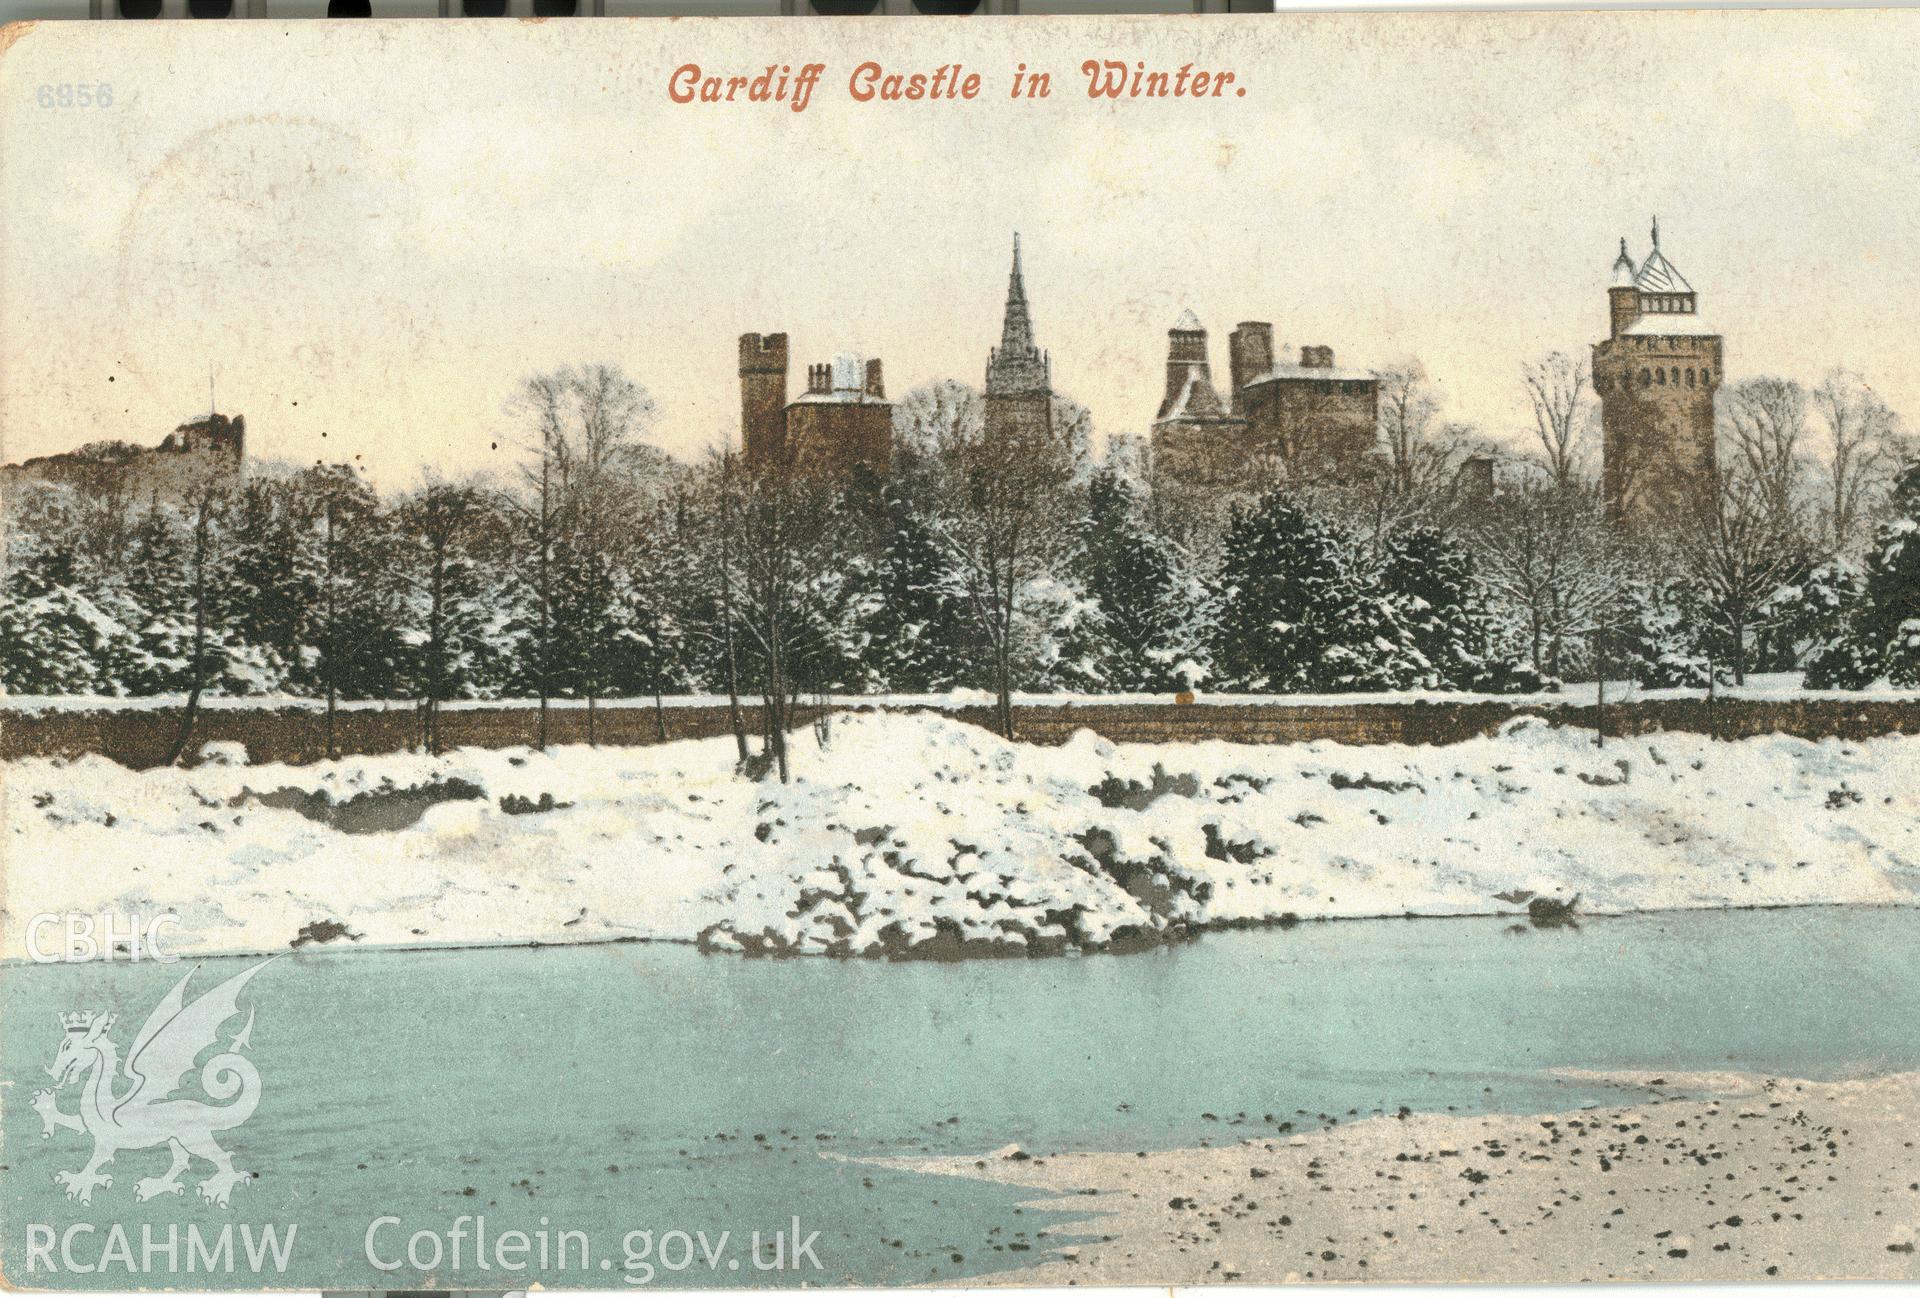 Digitised postcard image of Cardiff castle in winter, Valentine's Series. Produced by Parks and Gardens Data Services, from an original item in the Peter Davis Collection at Parks and Gardens UK. We hold only web-resolution images of this collection, suitable for viewing on screen and for research purposes only. We do not hold the original images, or publication quality scans.